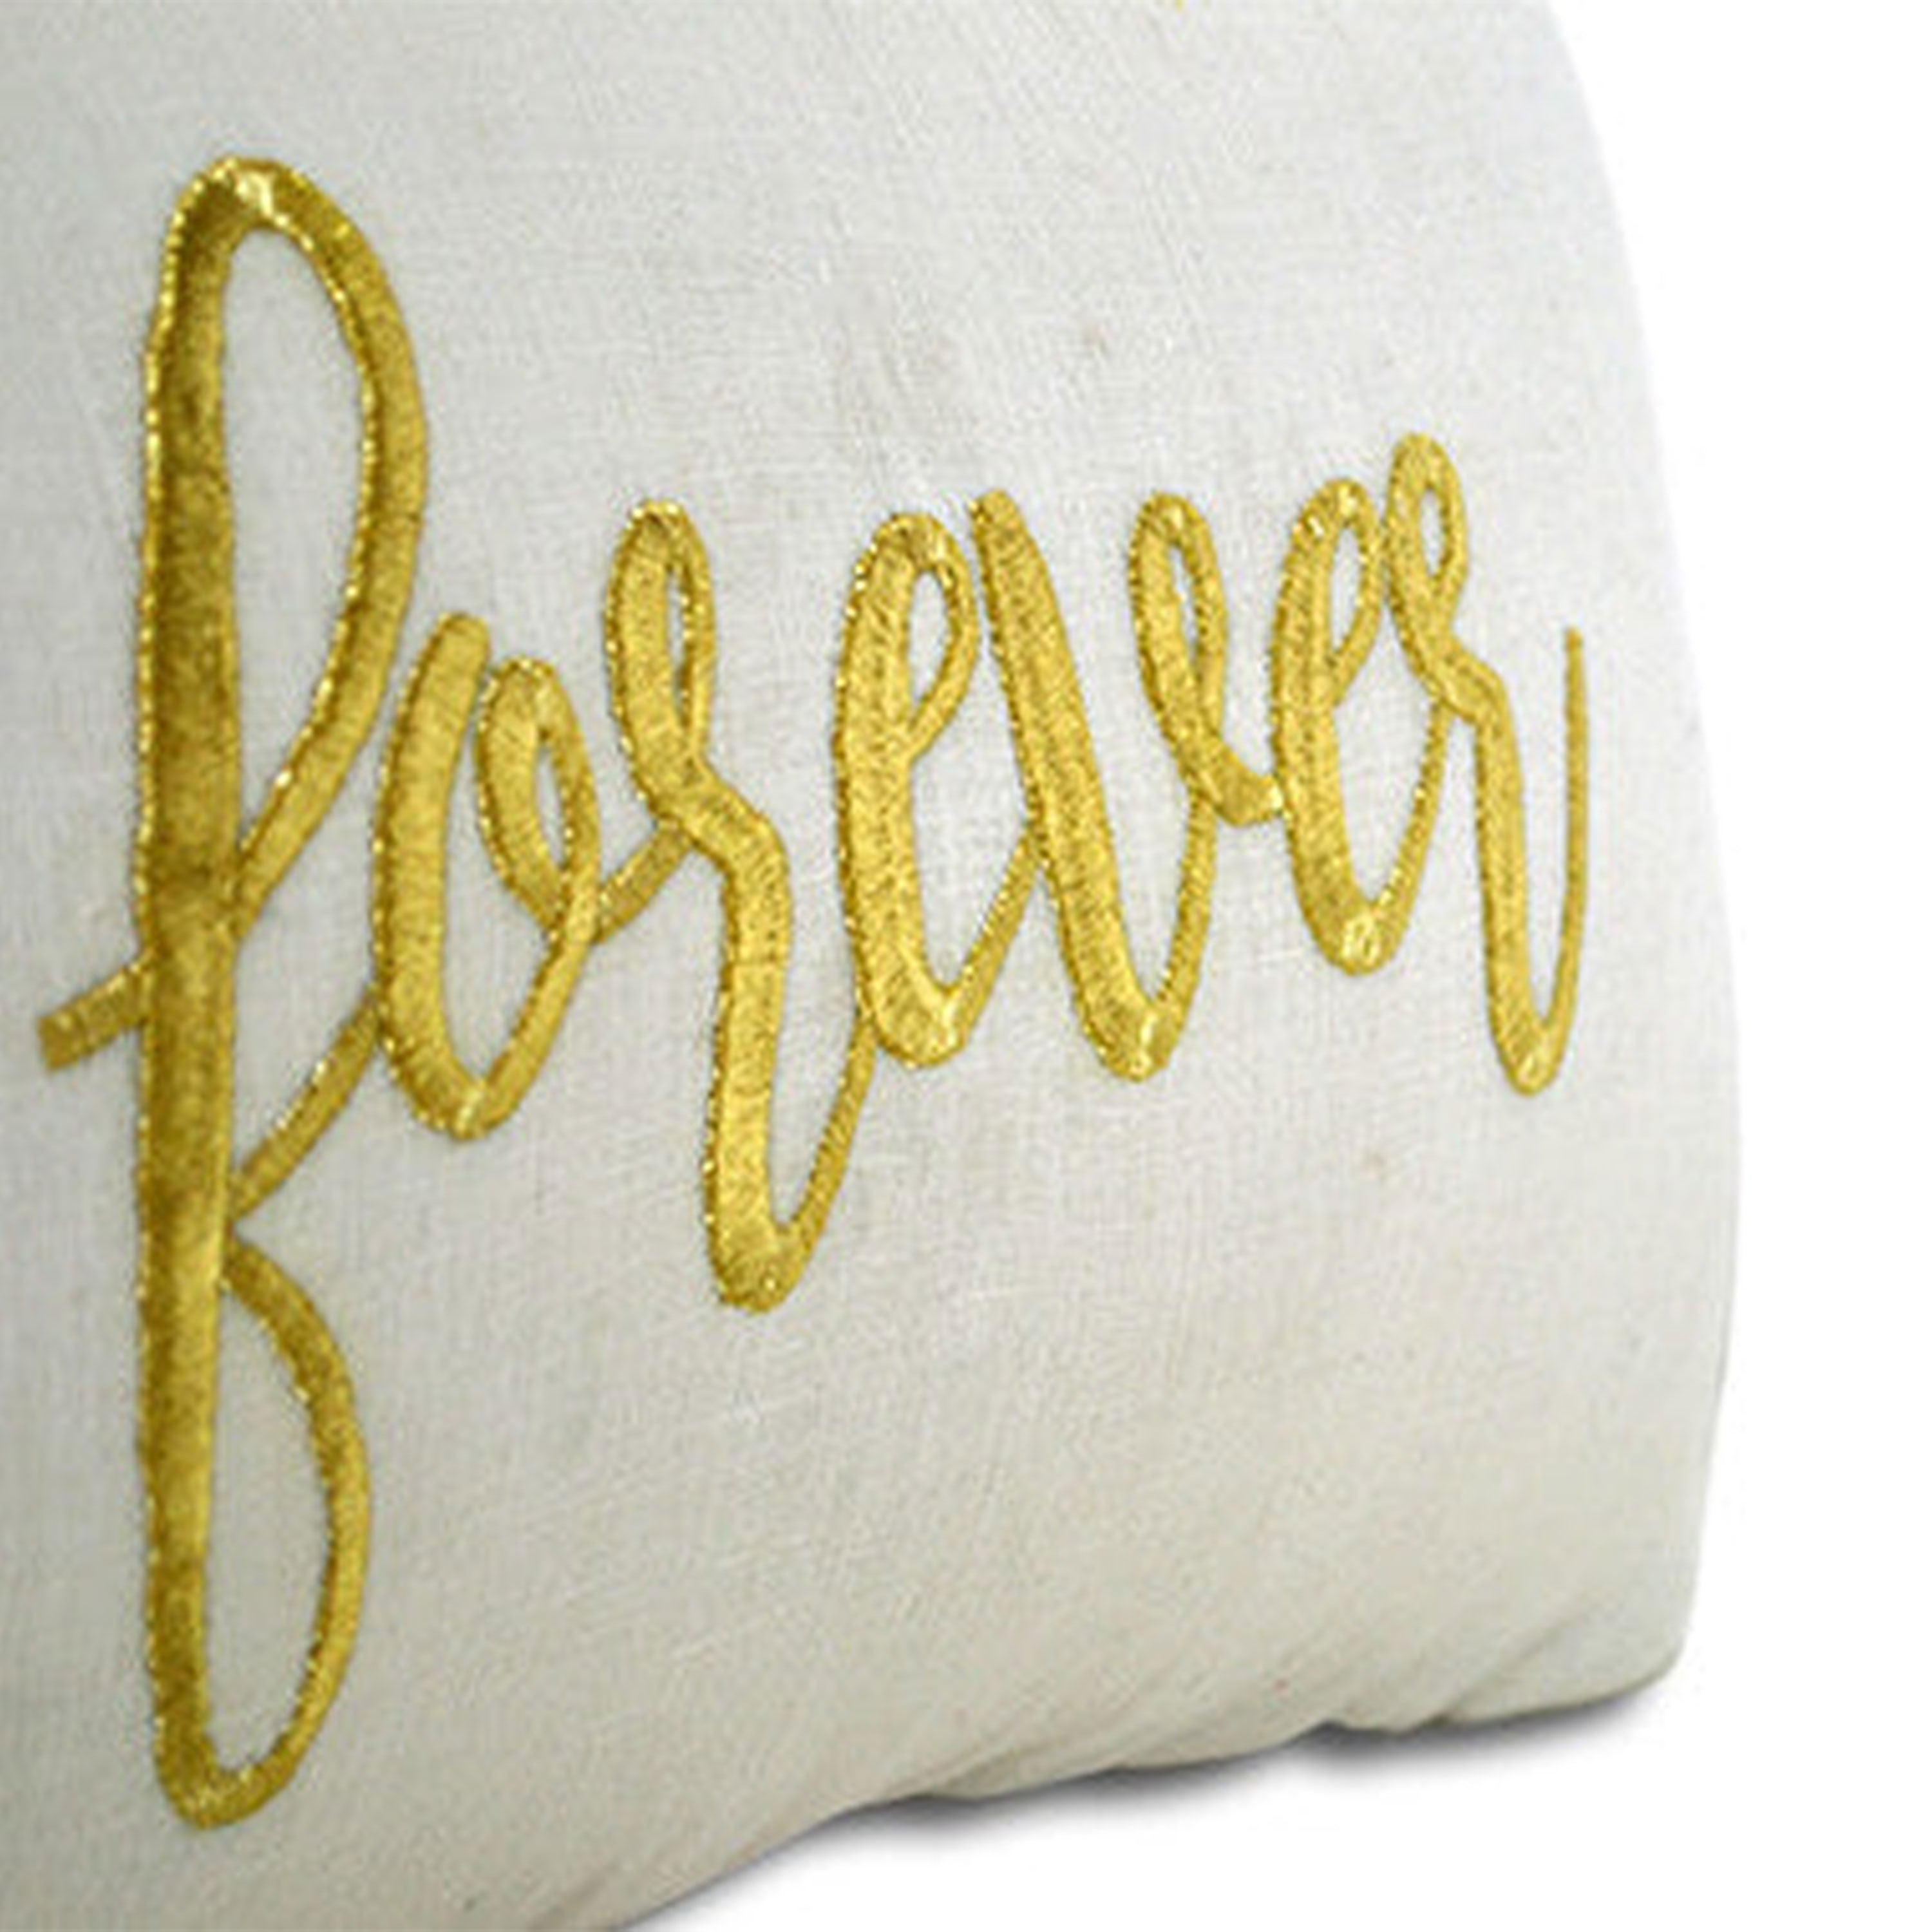 Forever Throw Pillows Valentines Day Gift Linen Pillow Cover